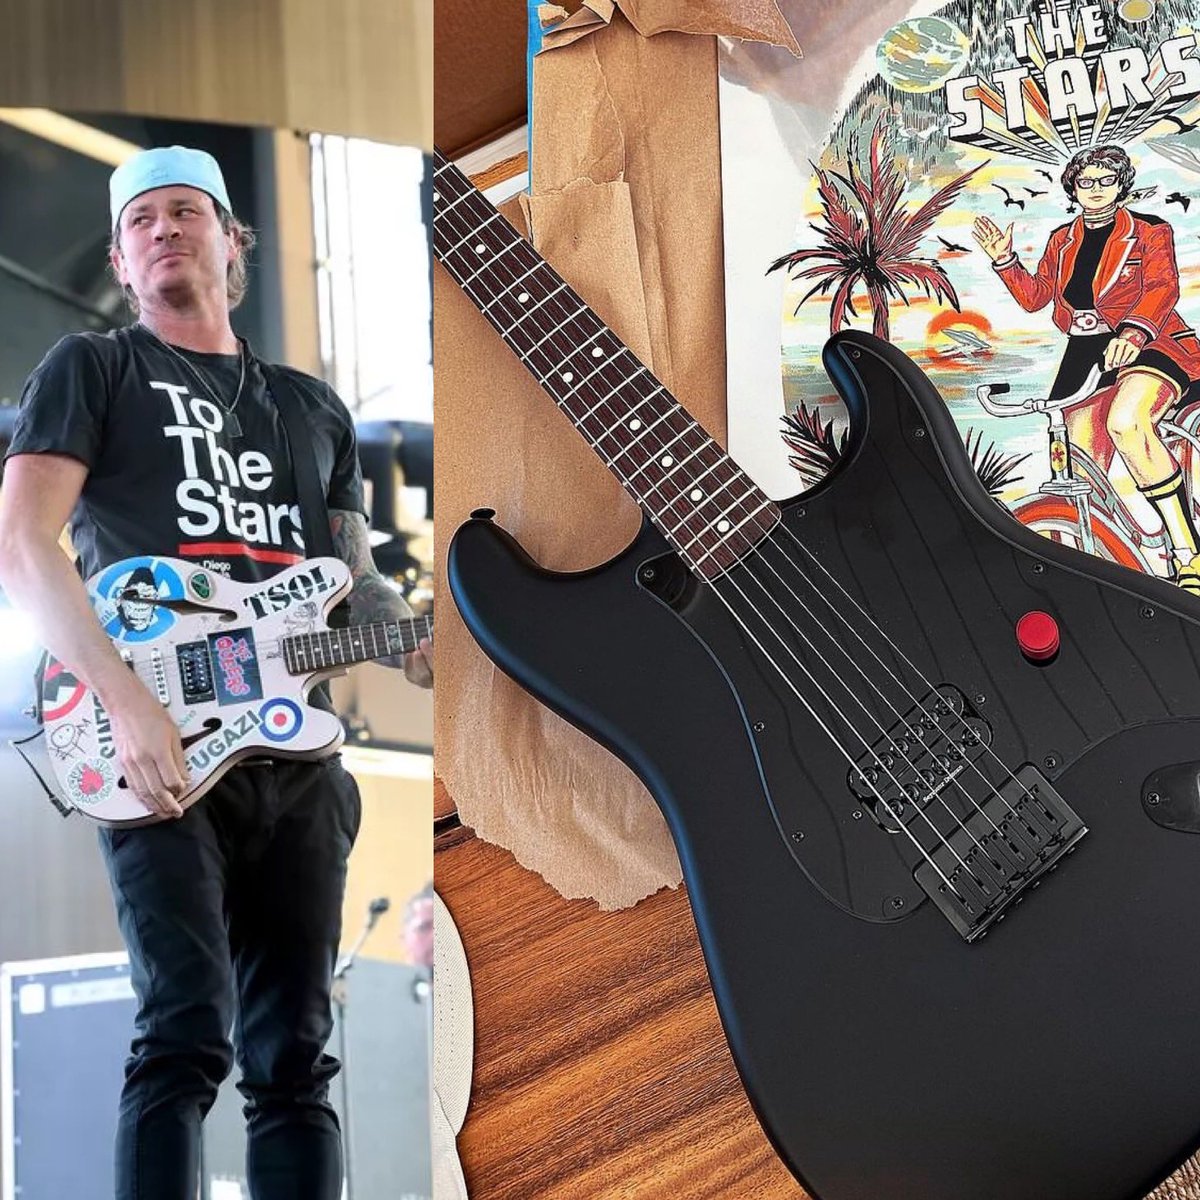 We are digging the new @tomdelonge @fender Stratocaster being released by @ToTheStarsMedia! Limited to 300 units, this guitar was designed by Tom and inspired by his TTS shirt with the black satin finish and the red knob. Thanks to IG account Gear182 for the cool insight!